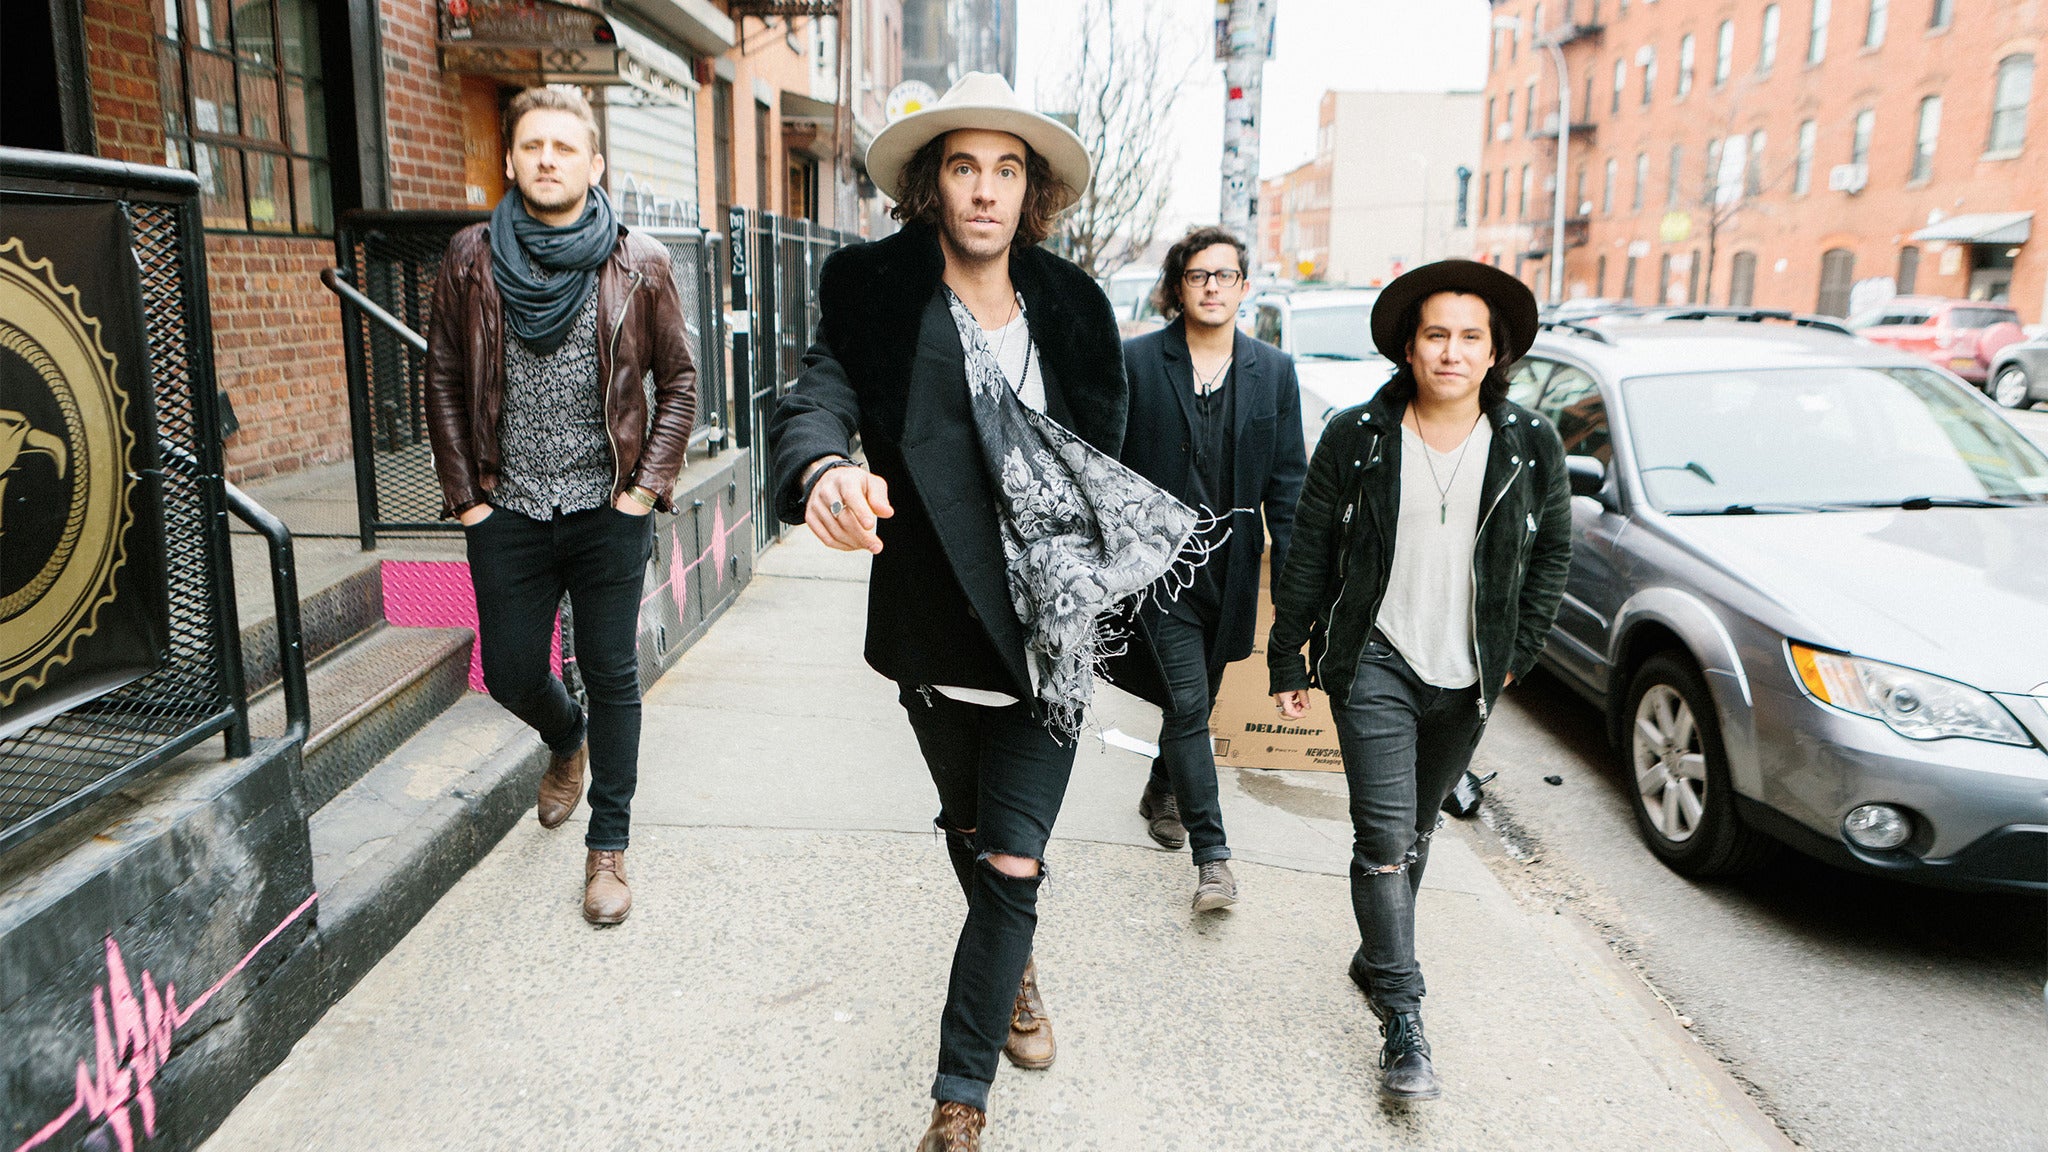 AMERICAN AUTHORS and MAGIC GIANT - Band of Brothers Road Show in Sacramento promo photo for Spotify presale offer code